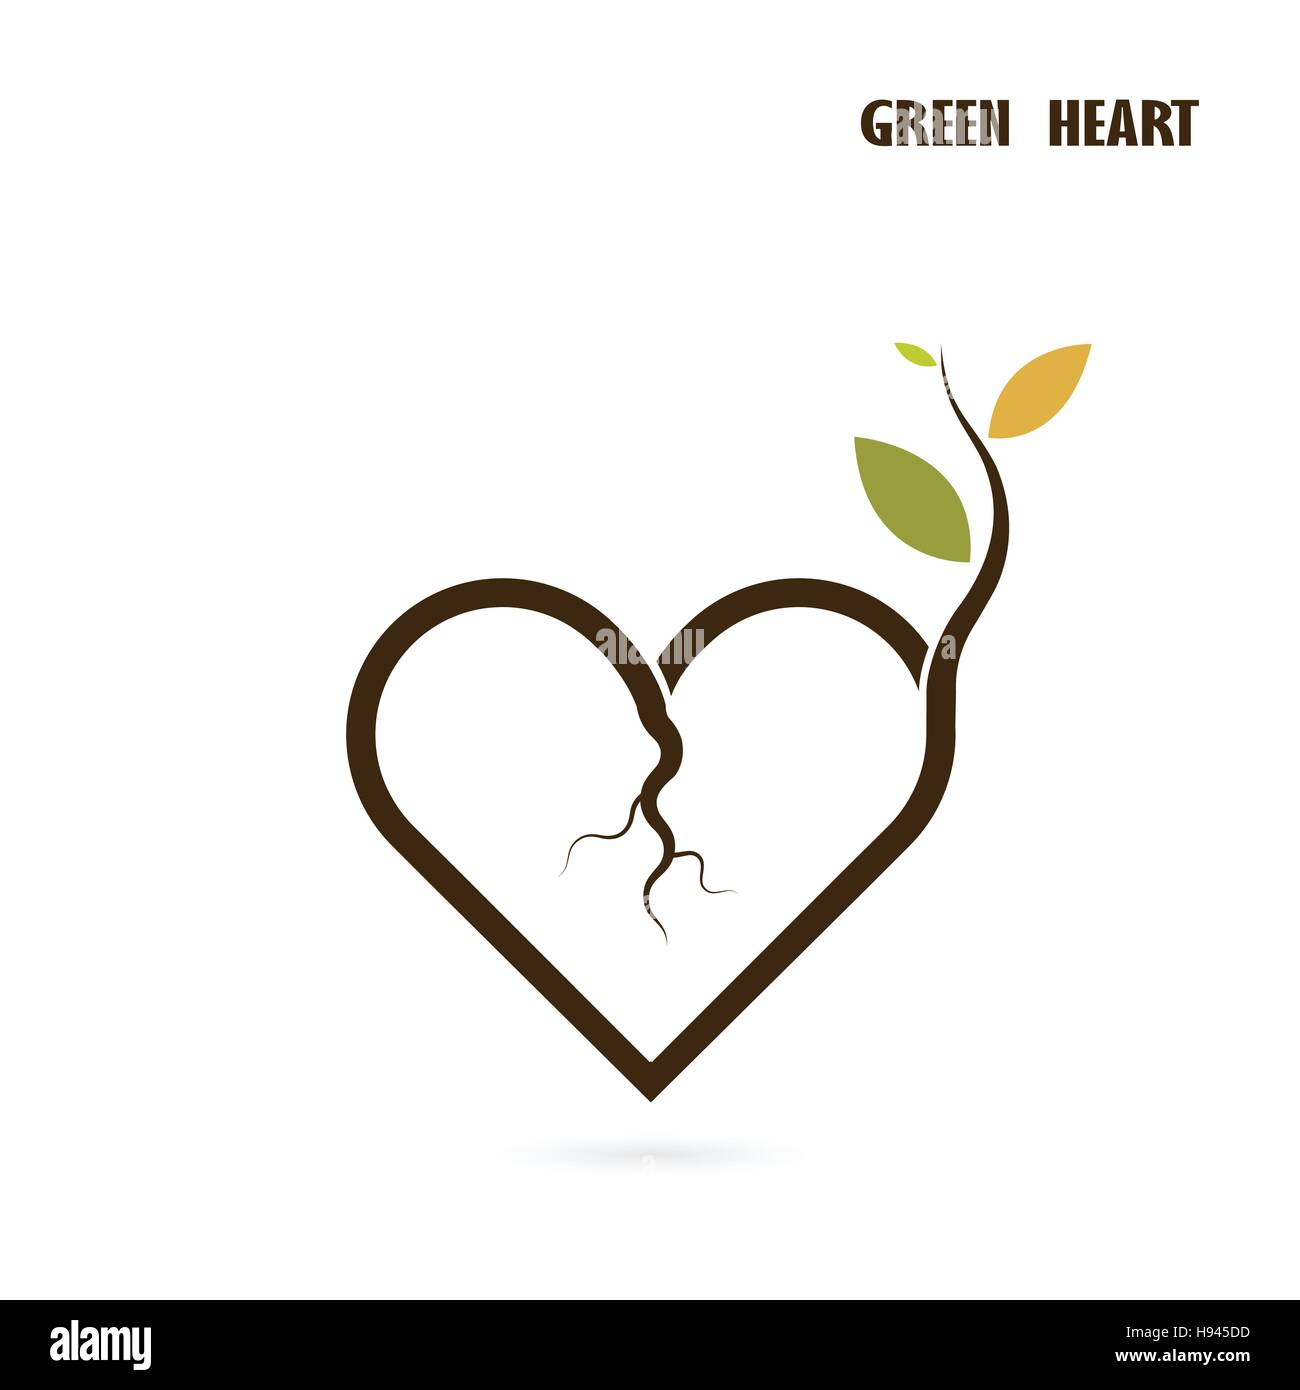 Heart sign and small tree icon with Green concept.Love nature creative logo design template.Green leaf and heart shape symbol. Ecology and Think green Stock Vector